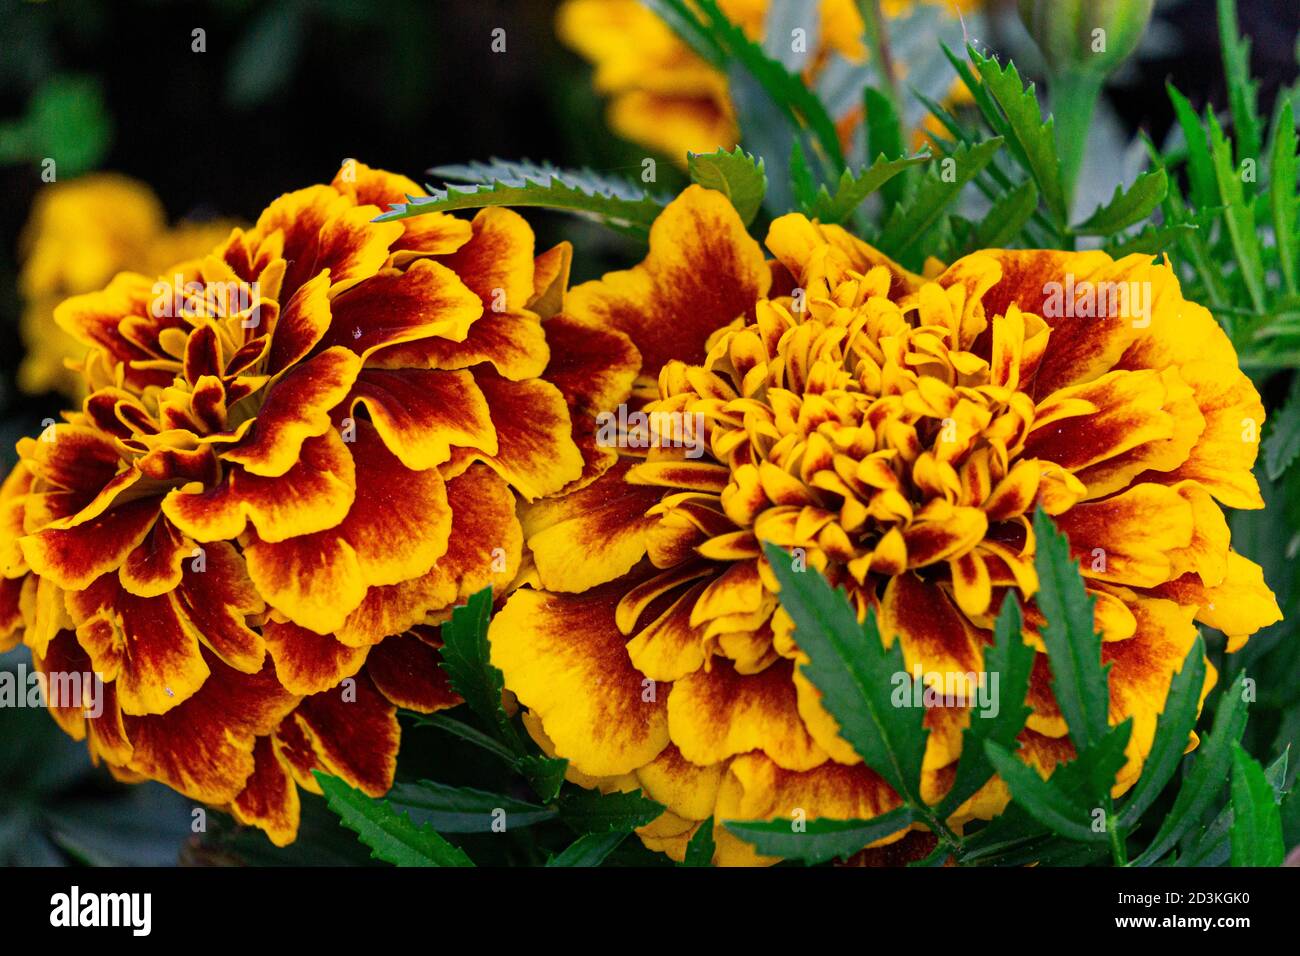 Delicate orange-yellow marigolds on a flowerbed in a park. Stock Photo